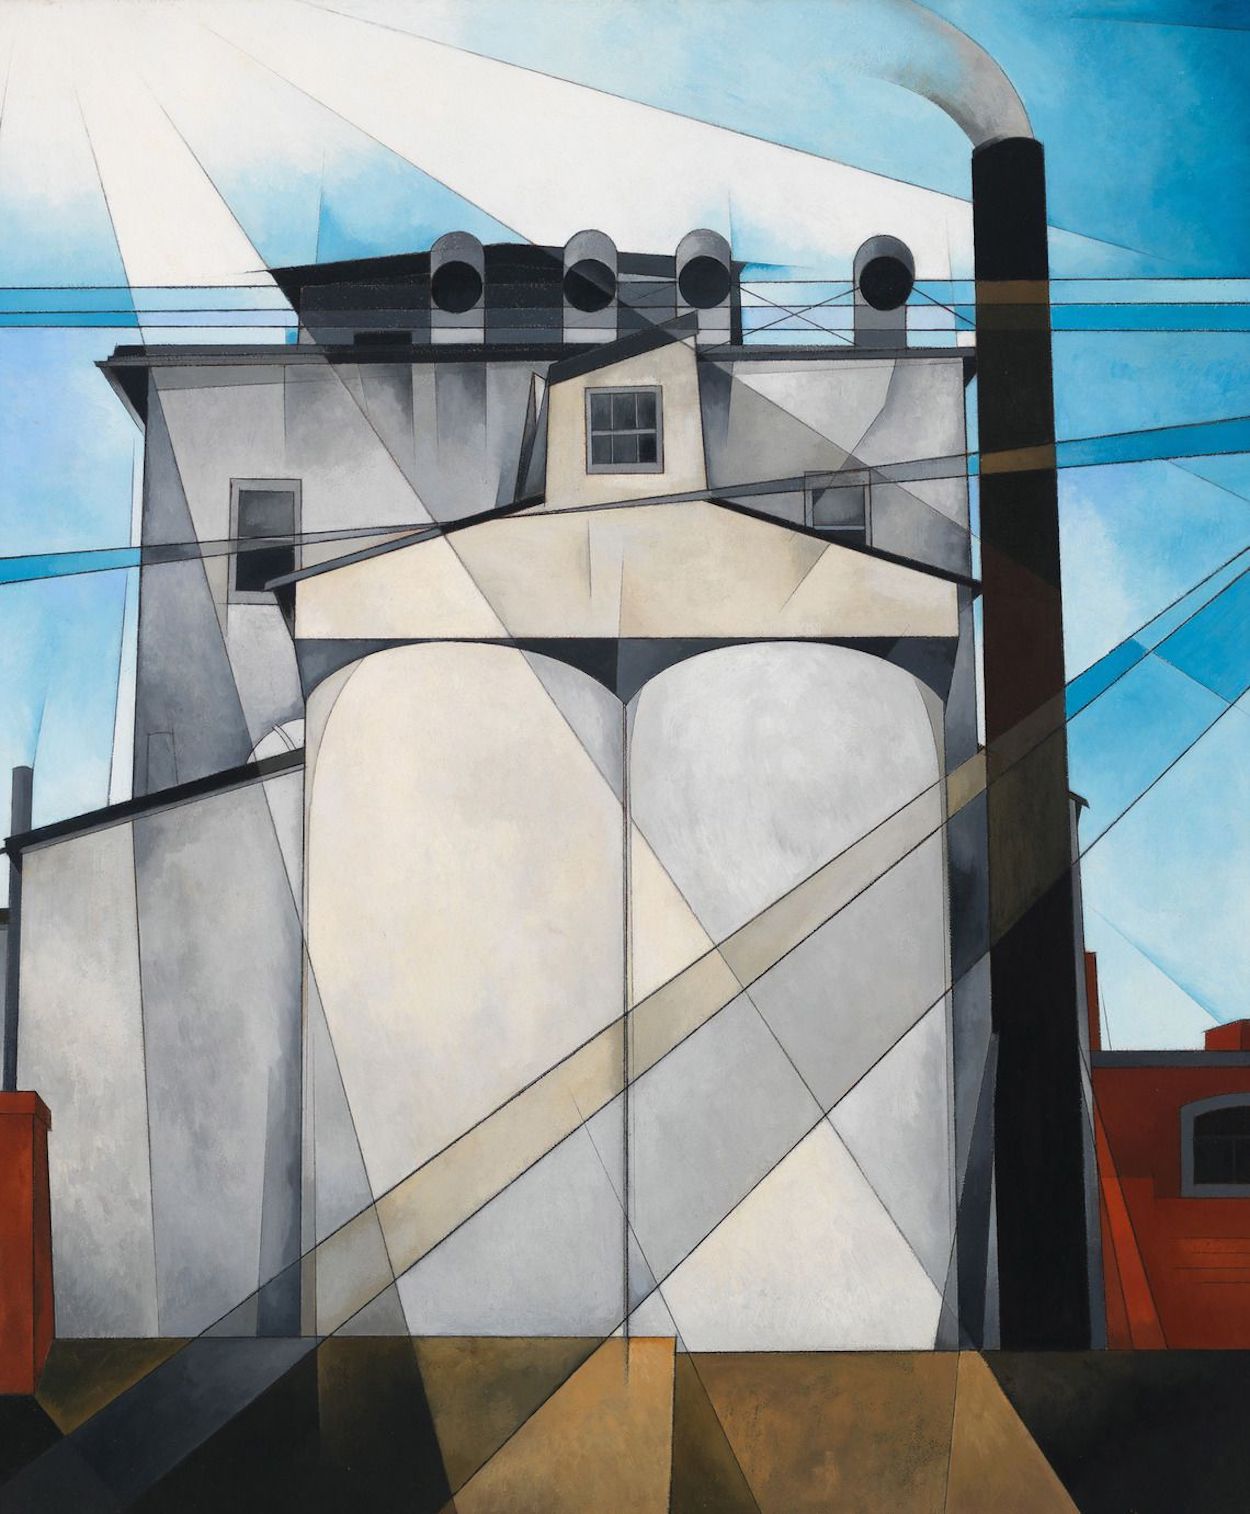 My Egypt by Charles Demuth - 1927 - 91.3 × 76.2 cm Whitney Museum of American Art